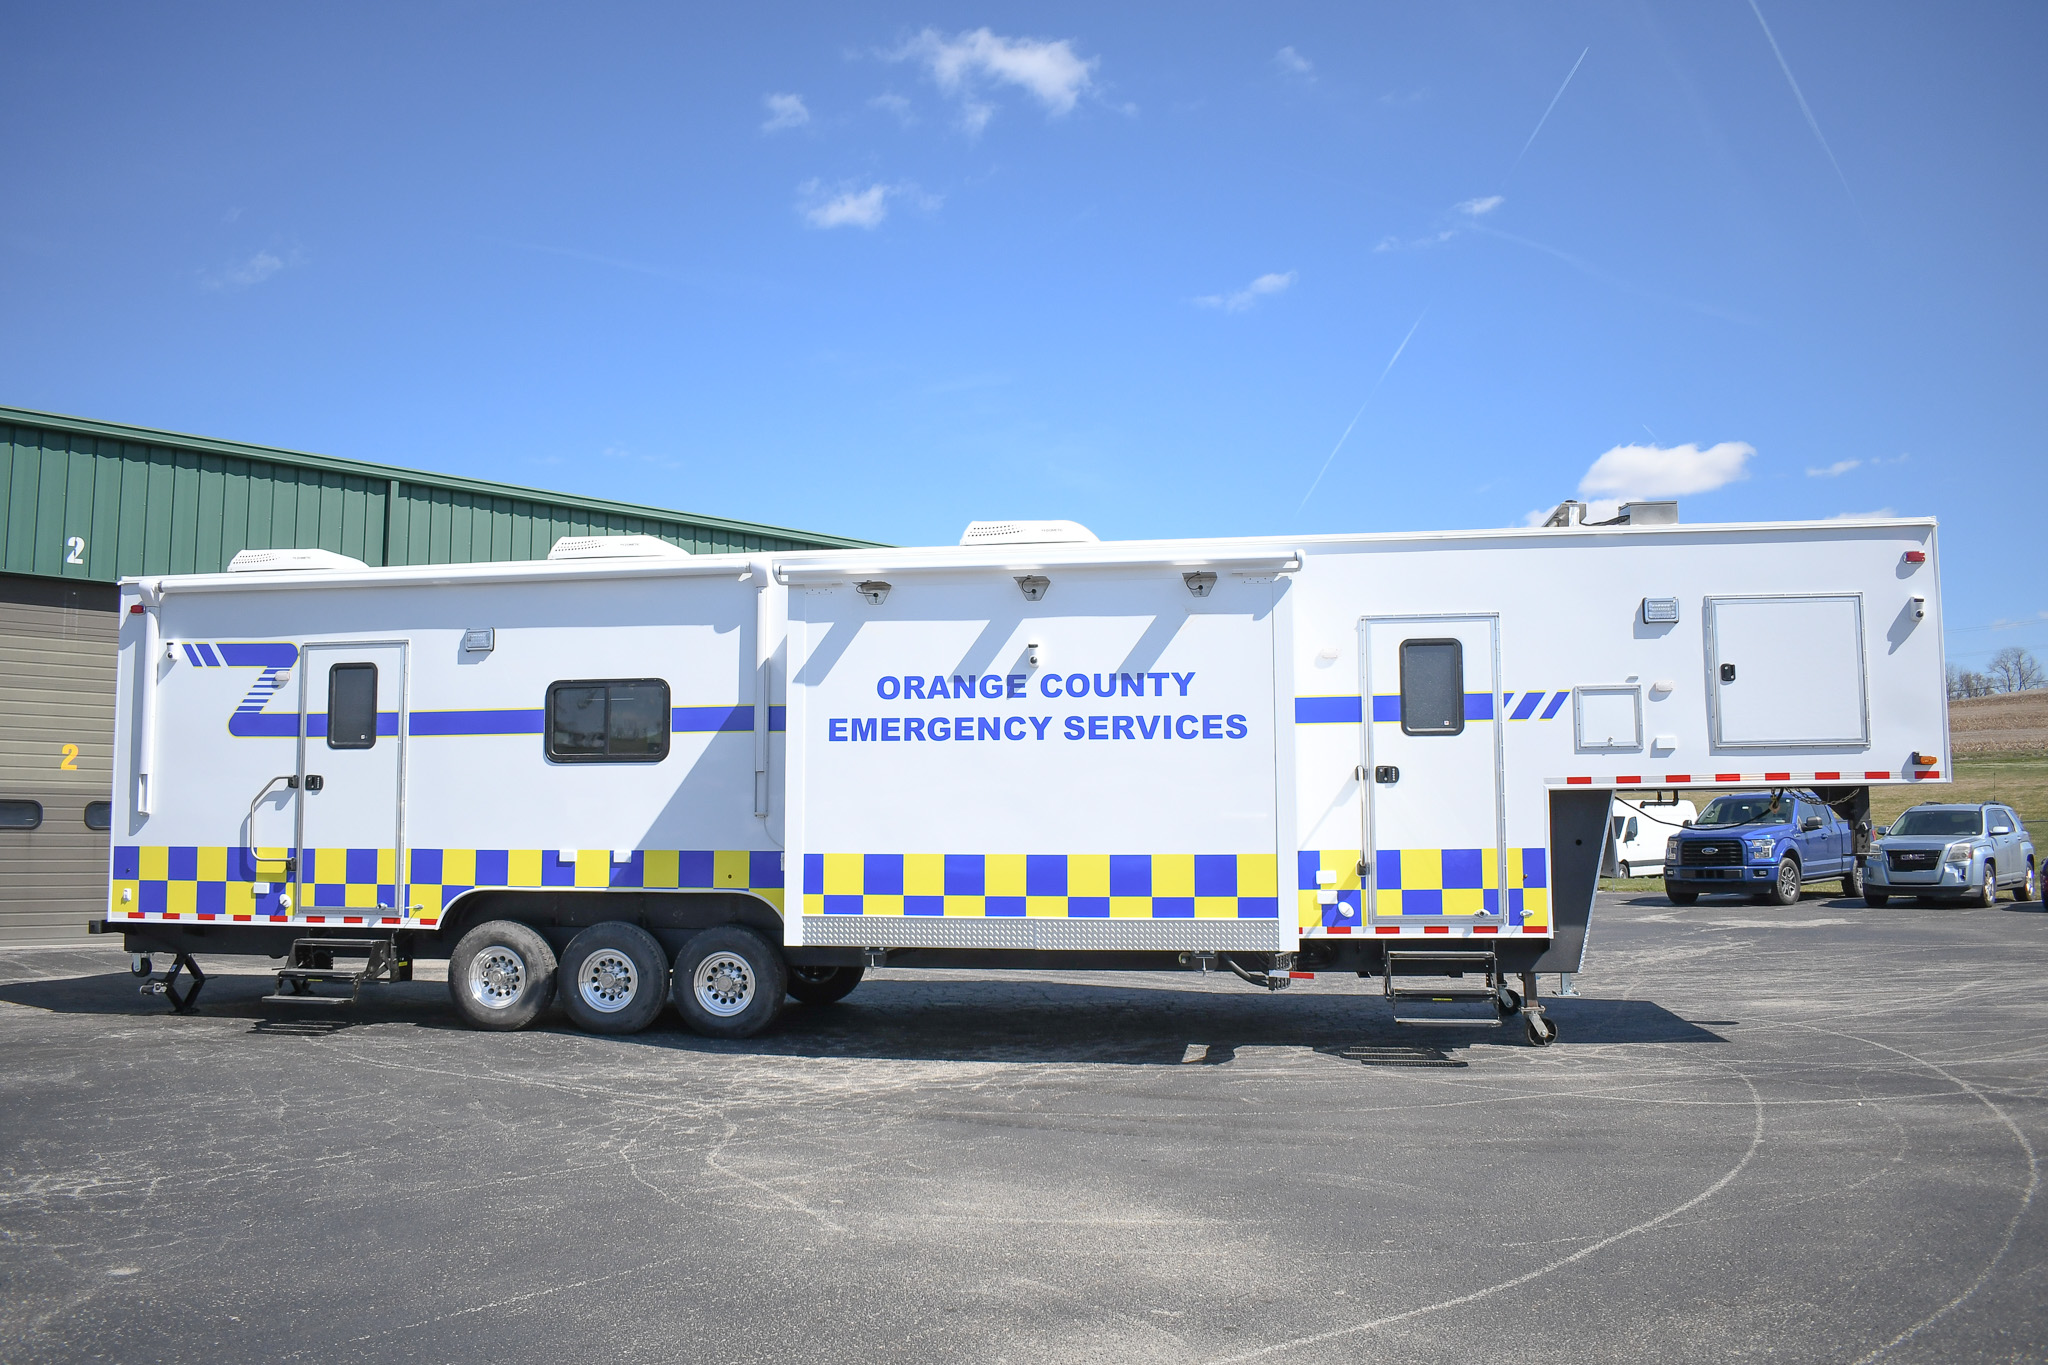 A side view of the unit for Hillsborough, NC.